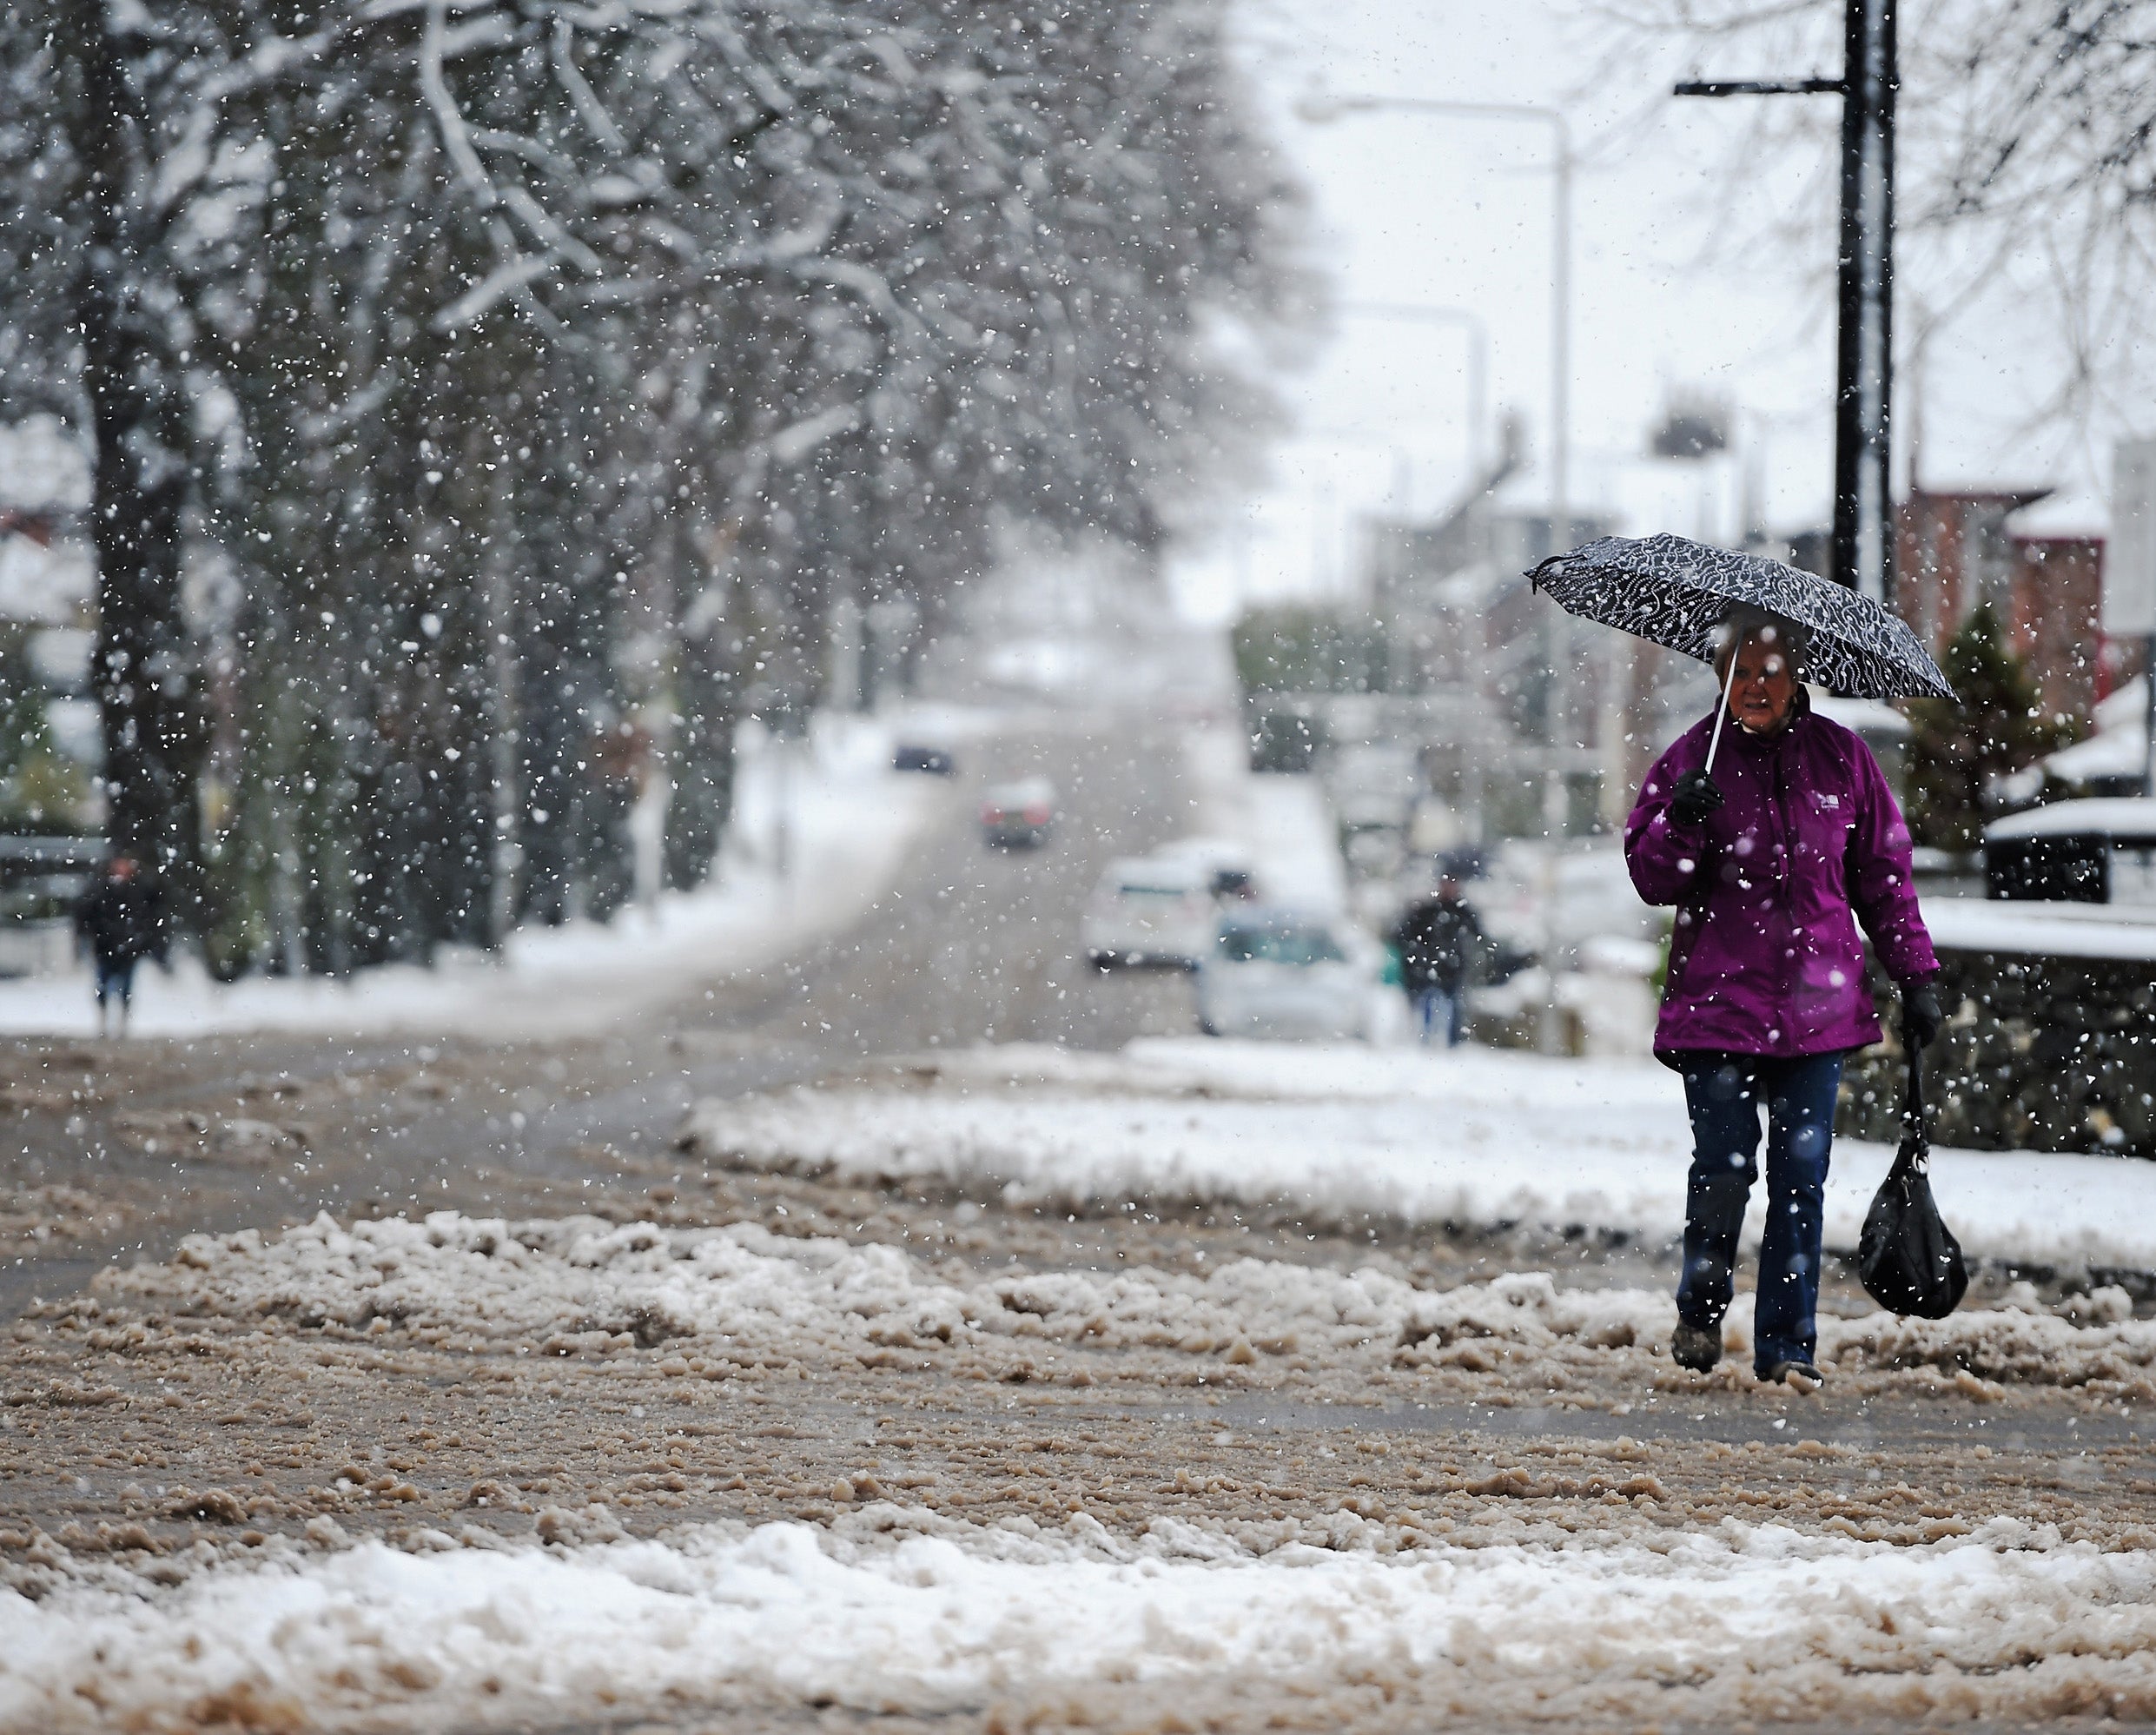 Scotland and northern England is due to see the first snow of the year this weekend